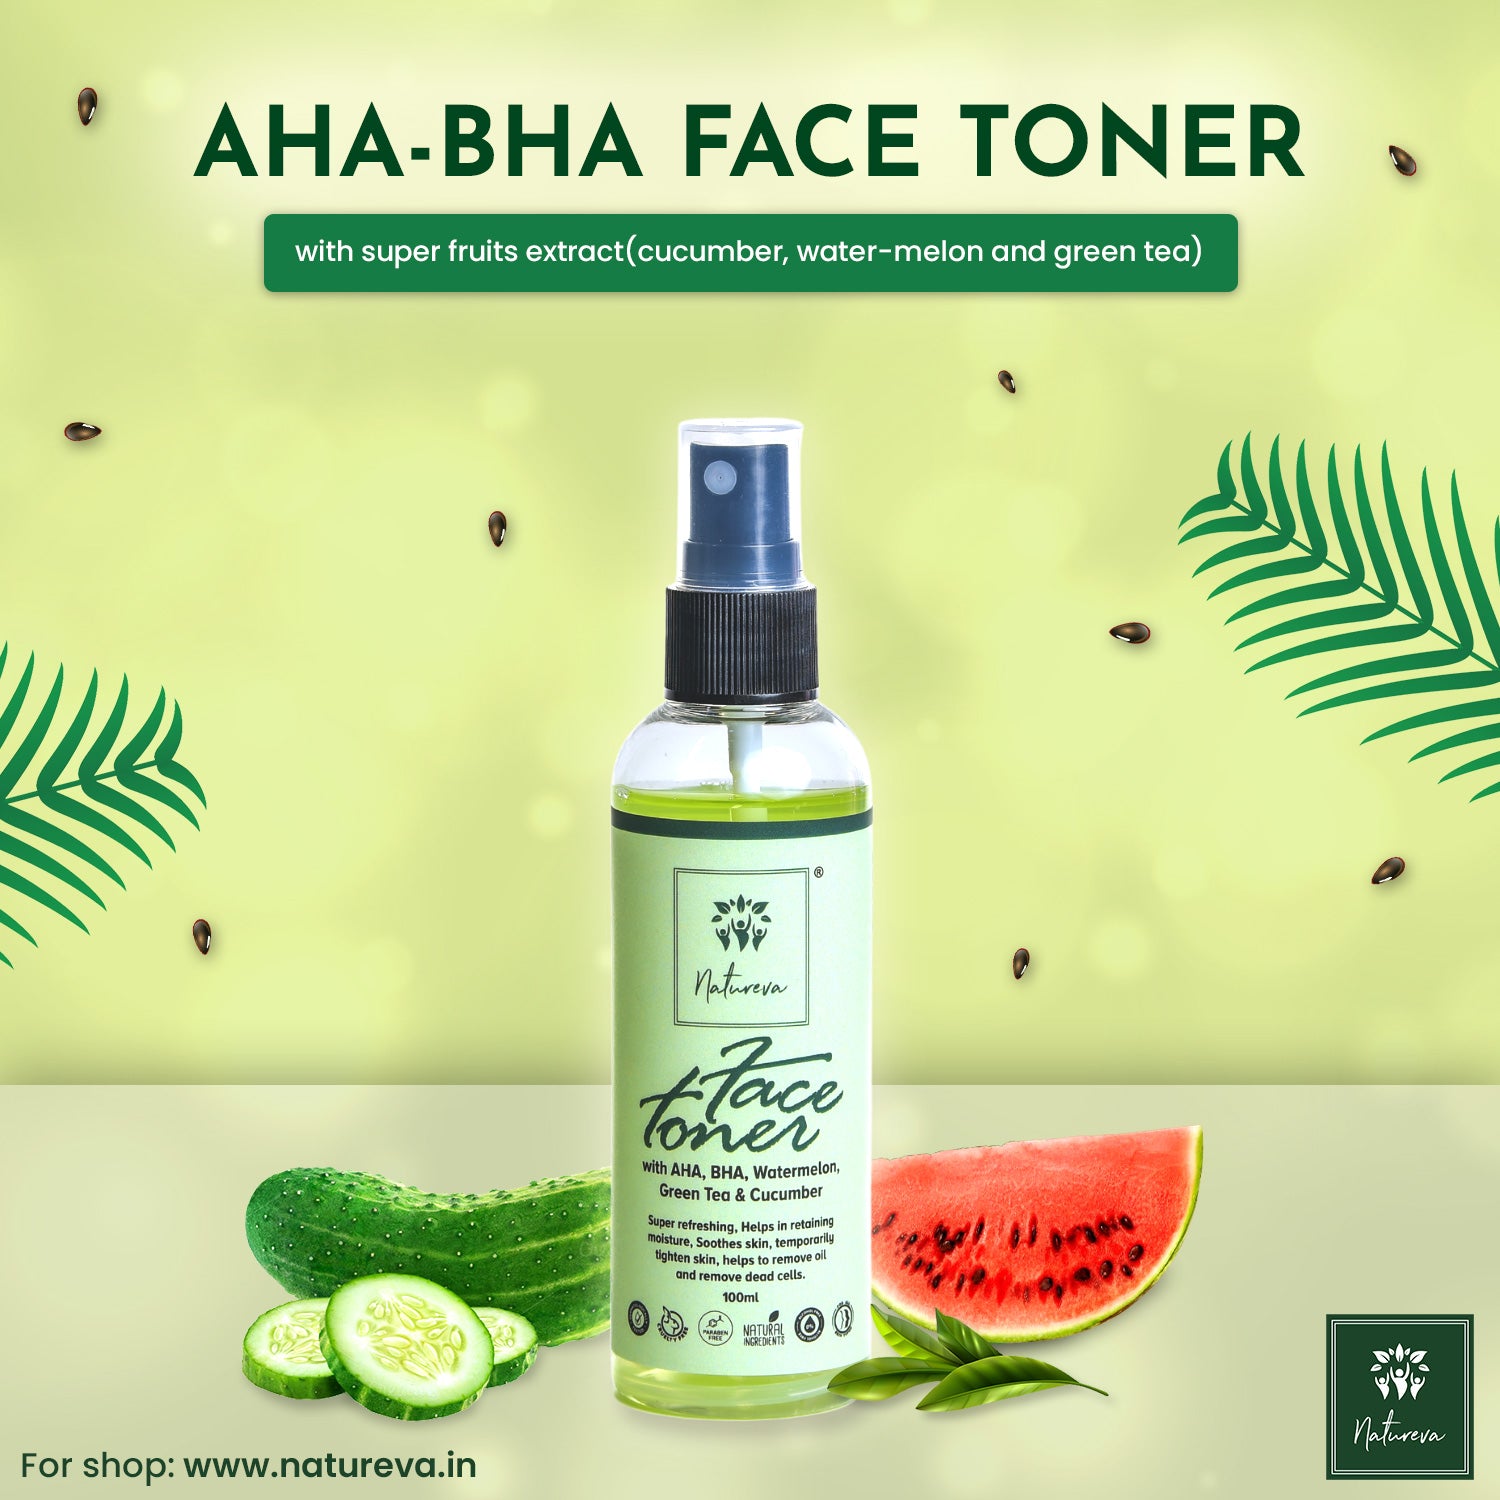 Natureva Face Toner for Dry Skin: Ingredients and Benefits